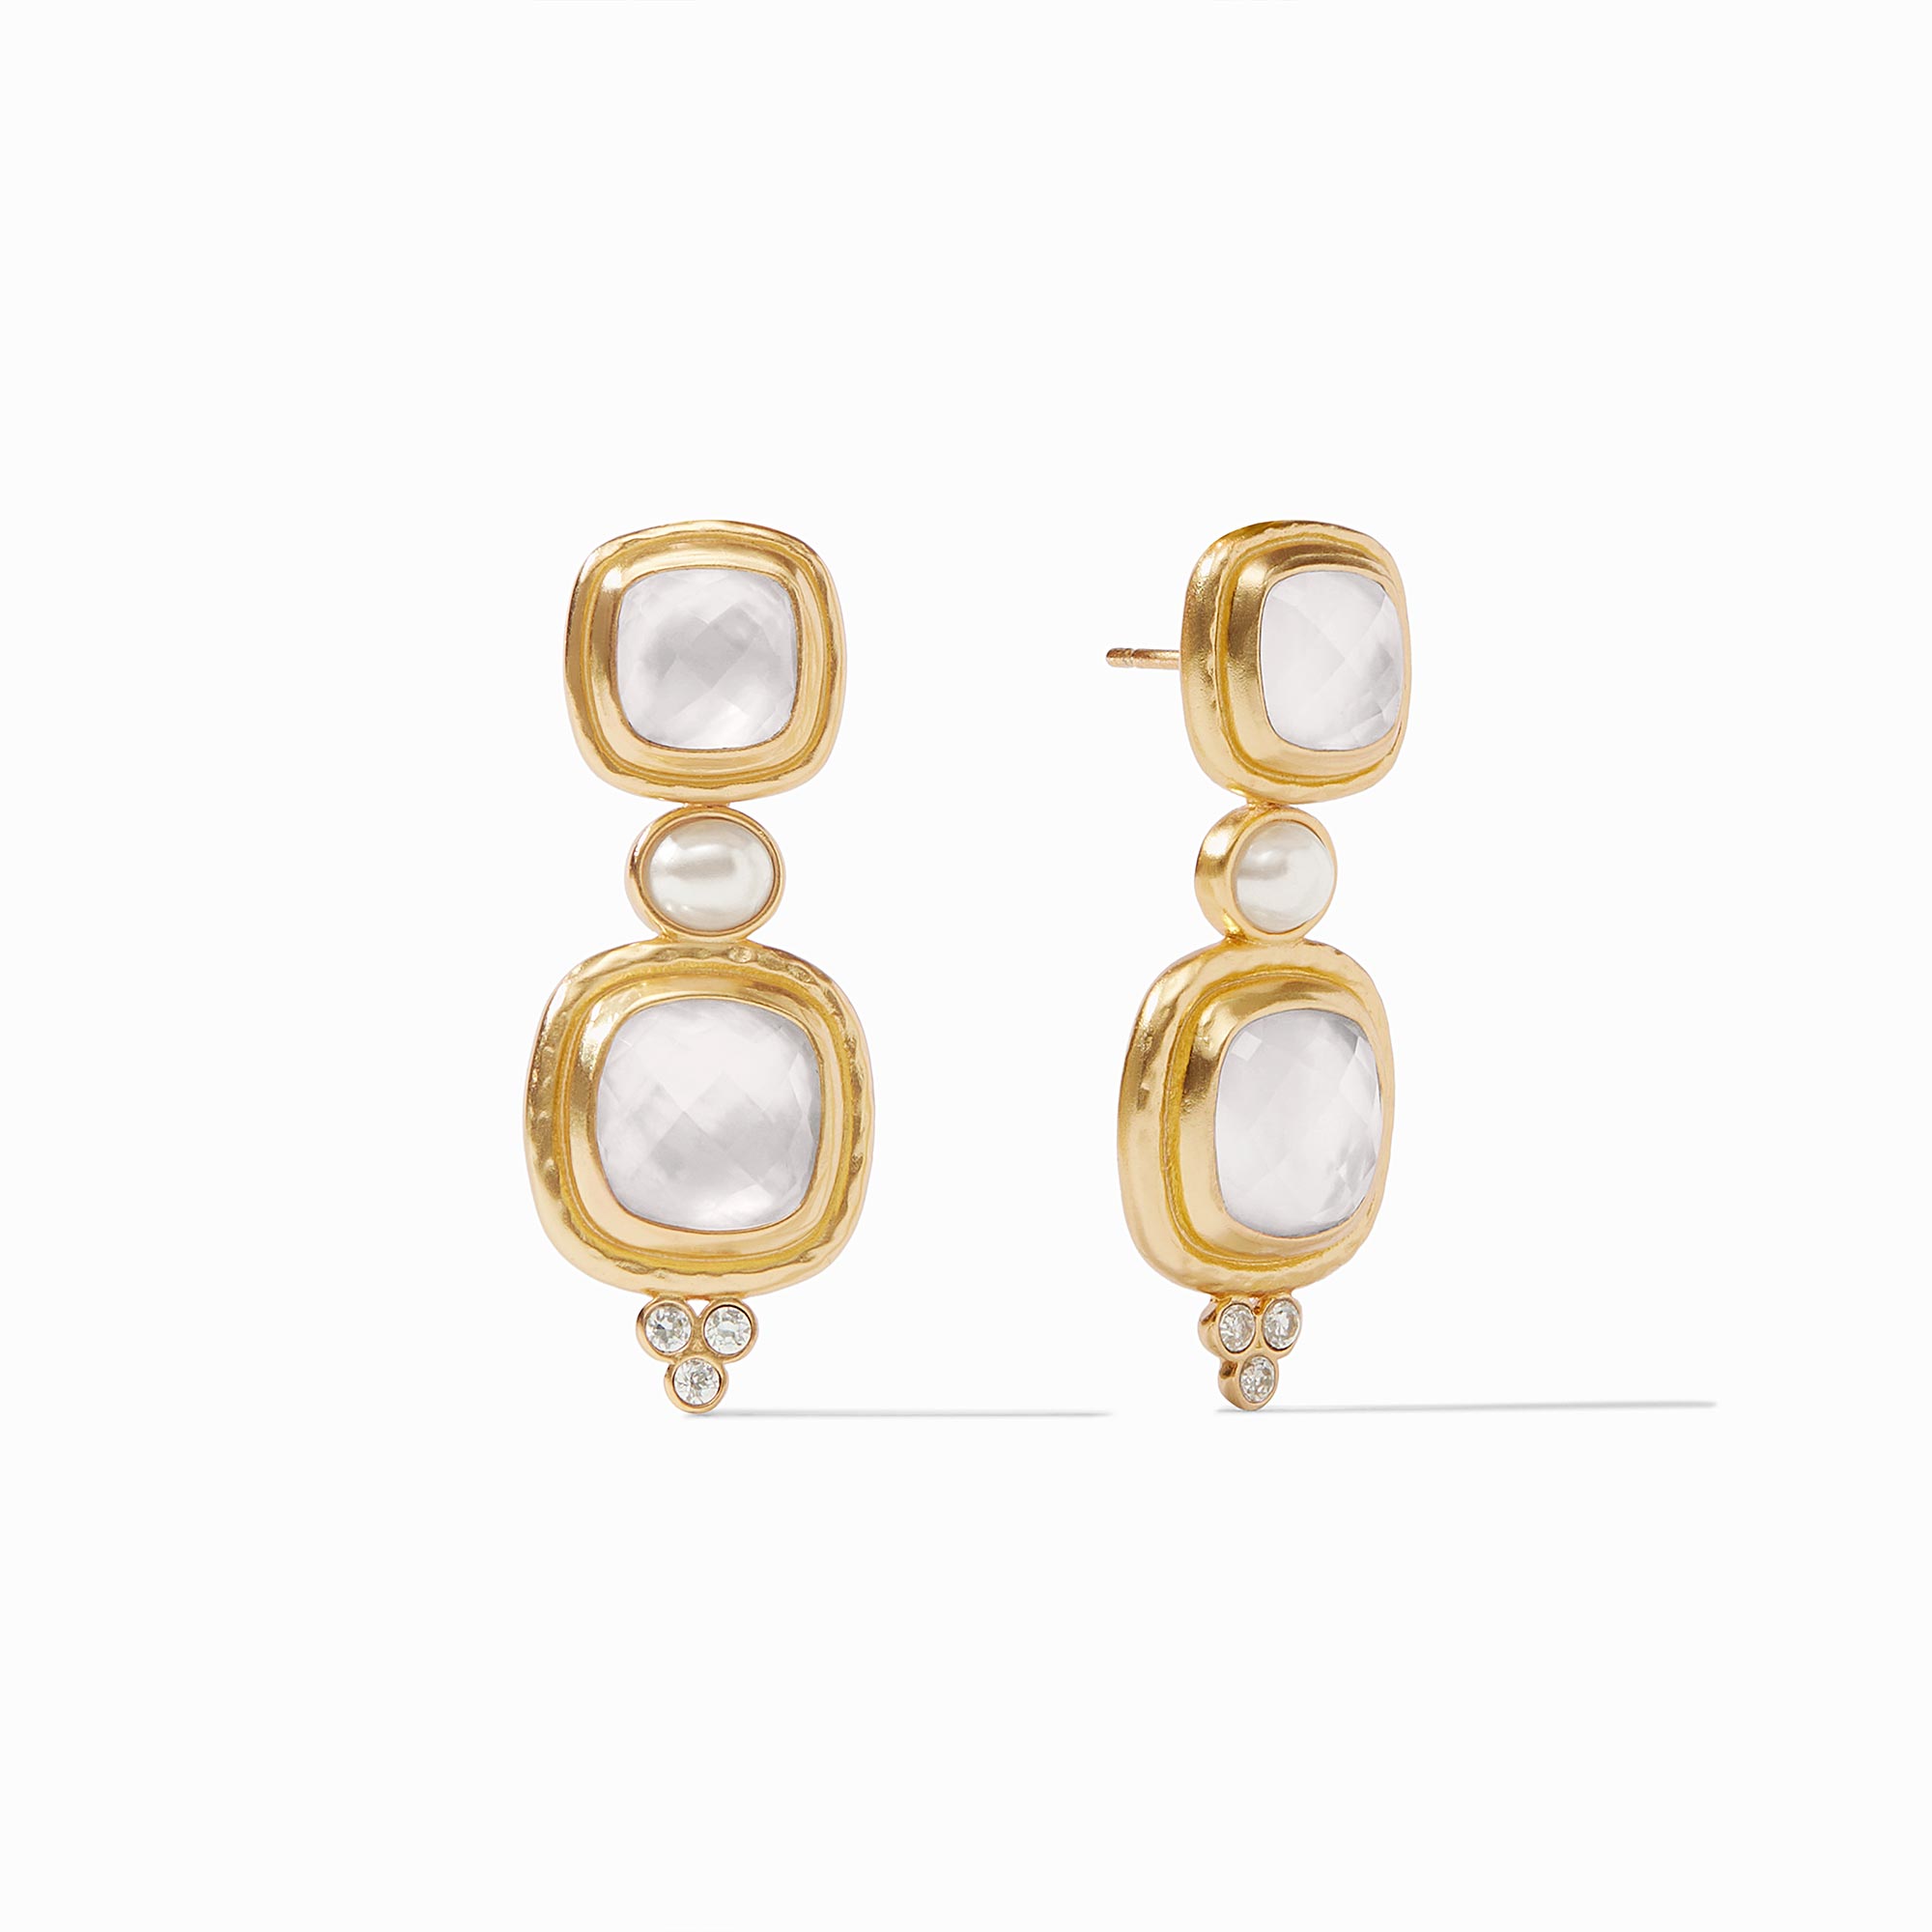 Julie Vos - Tudor Statement Earring, Iridescent Clear Crystal